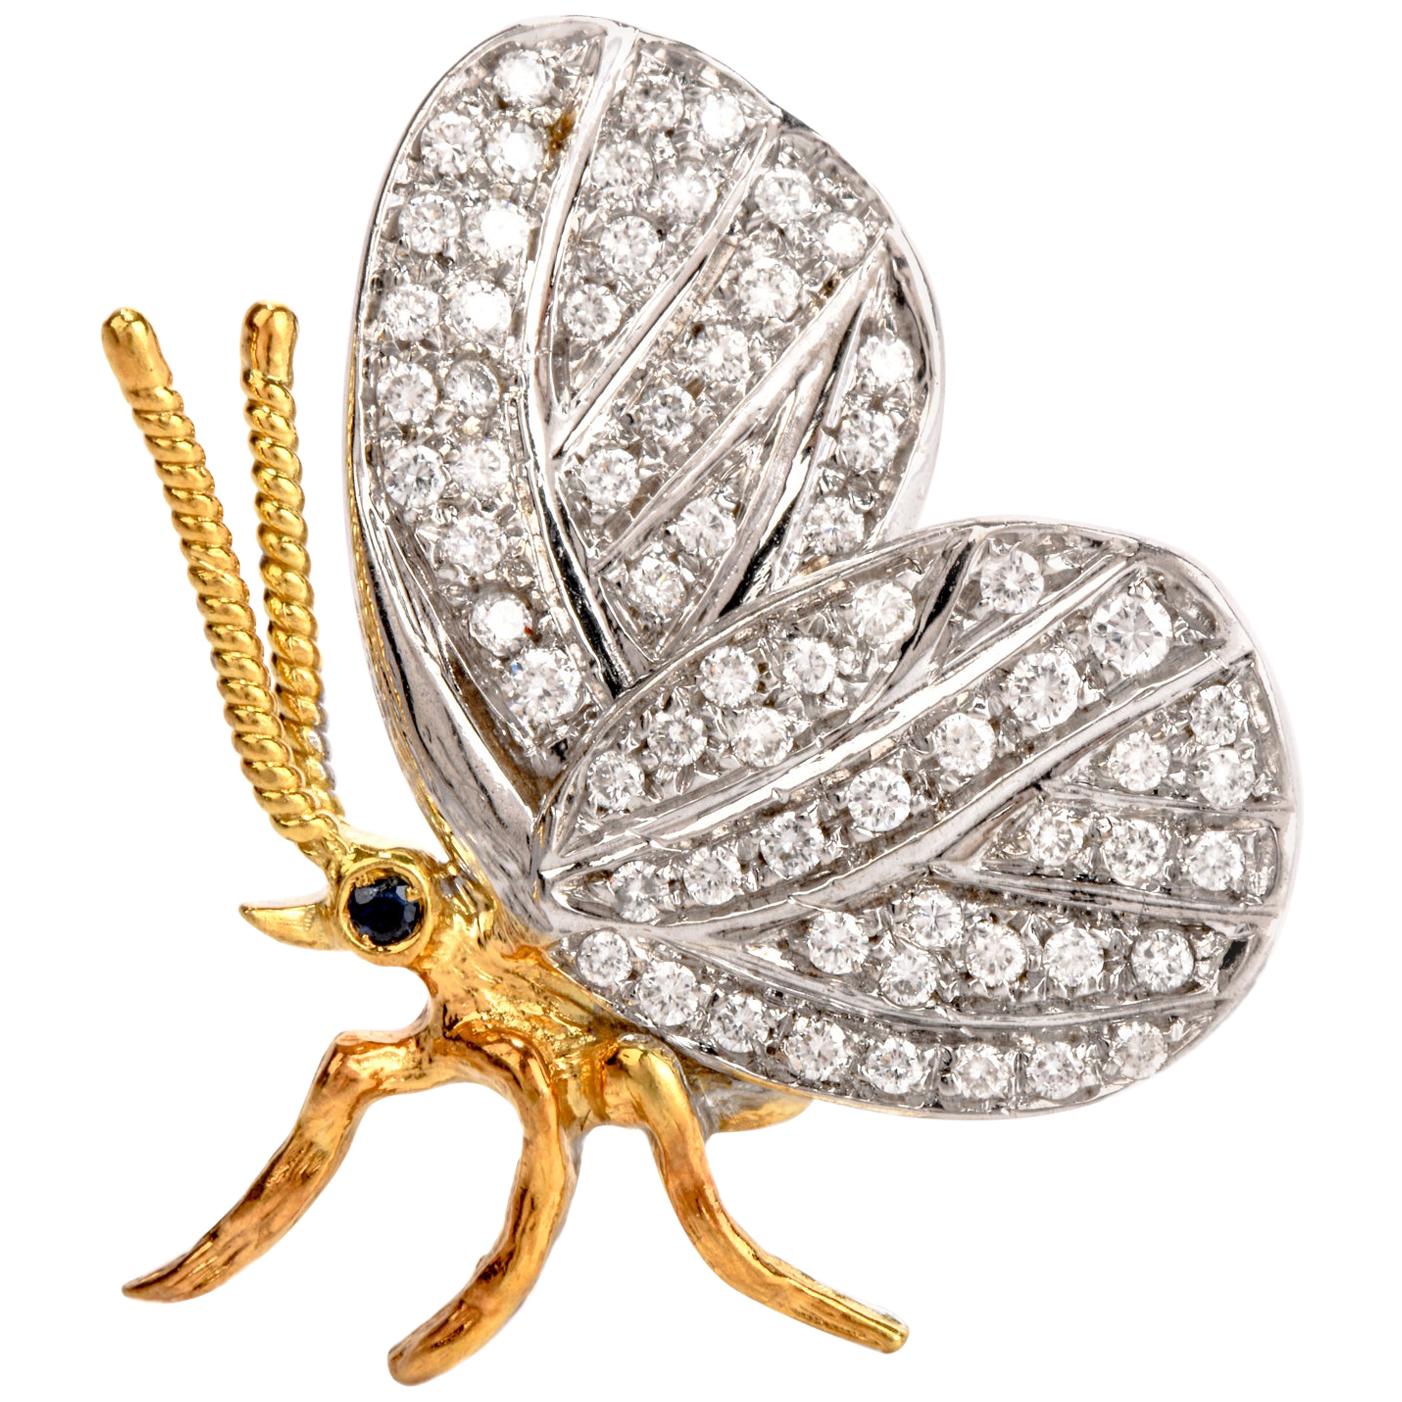 This exquisite Vintage butterfly pin celebrates the beauty and marvel of nature, with spectacularly detailed wings that are bound to give flight at any moment! Finely crafted in solid platinum and 18K yellow gold. Its wings are covered with 94 round